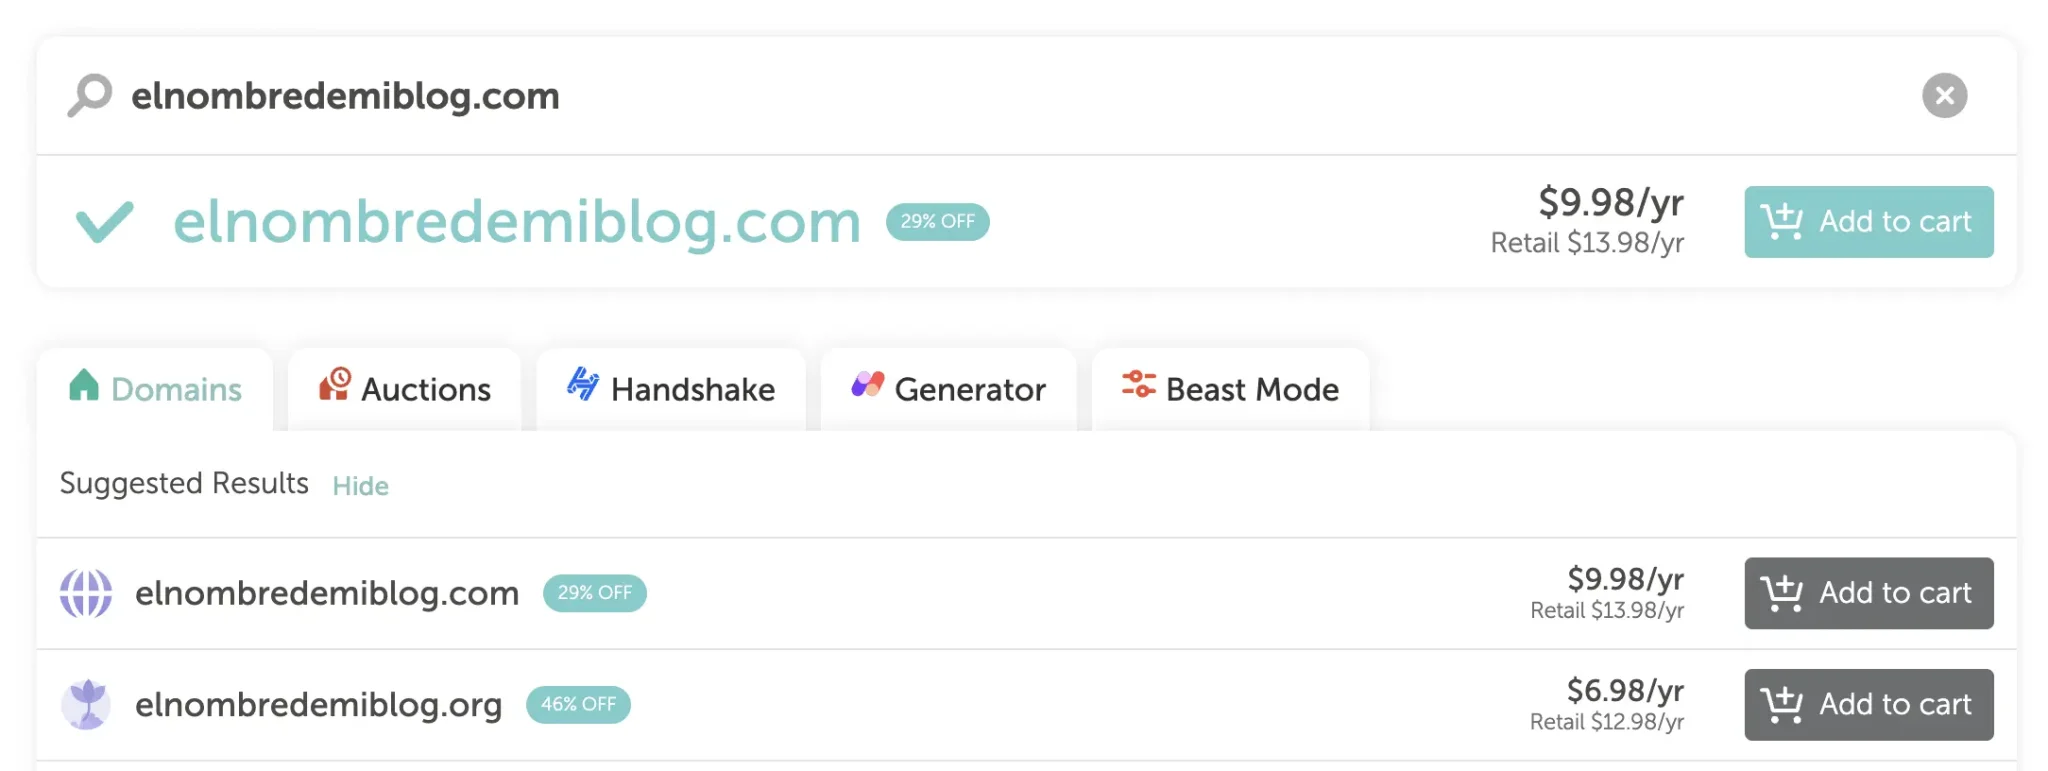 Choose a domain for your blog name